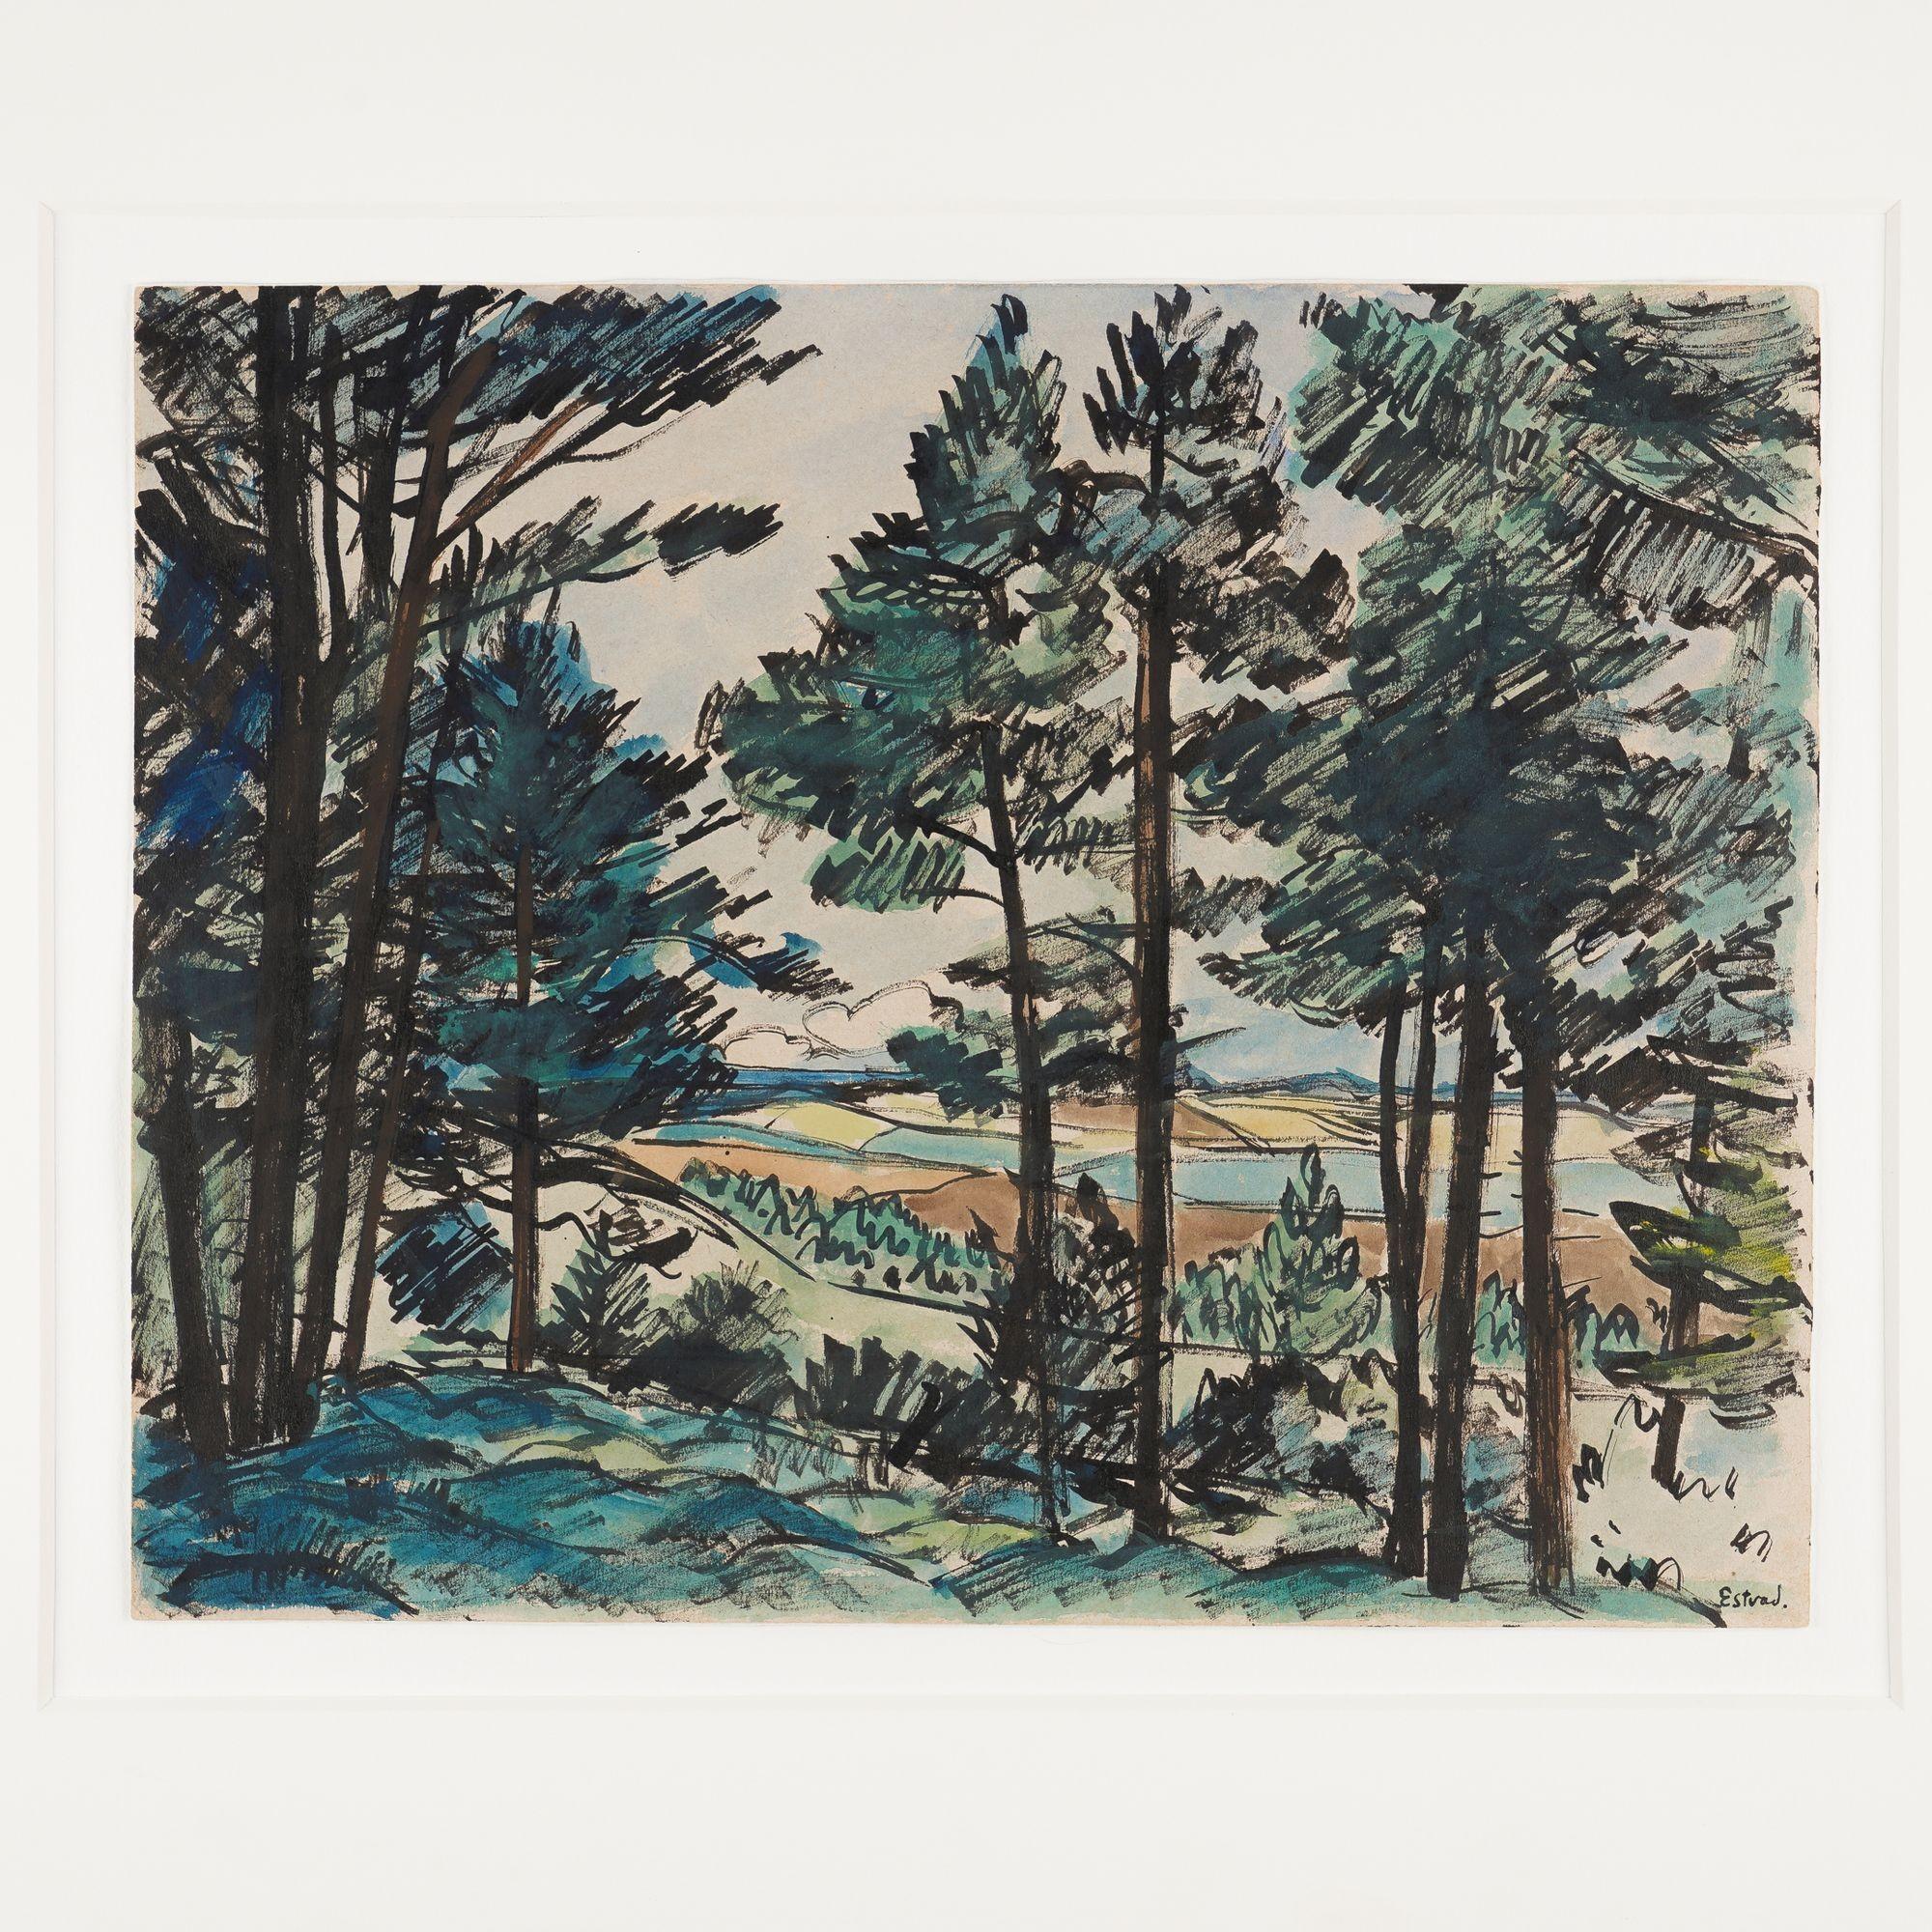 Highly expressive and dynamic watercolor landscape of a pine forest in tones of blues, greens, and browns. The paper has been conserved, de-acidified, and float mounted on archival mat and framed in a satin chrome molding under UV filtering